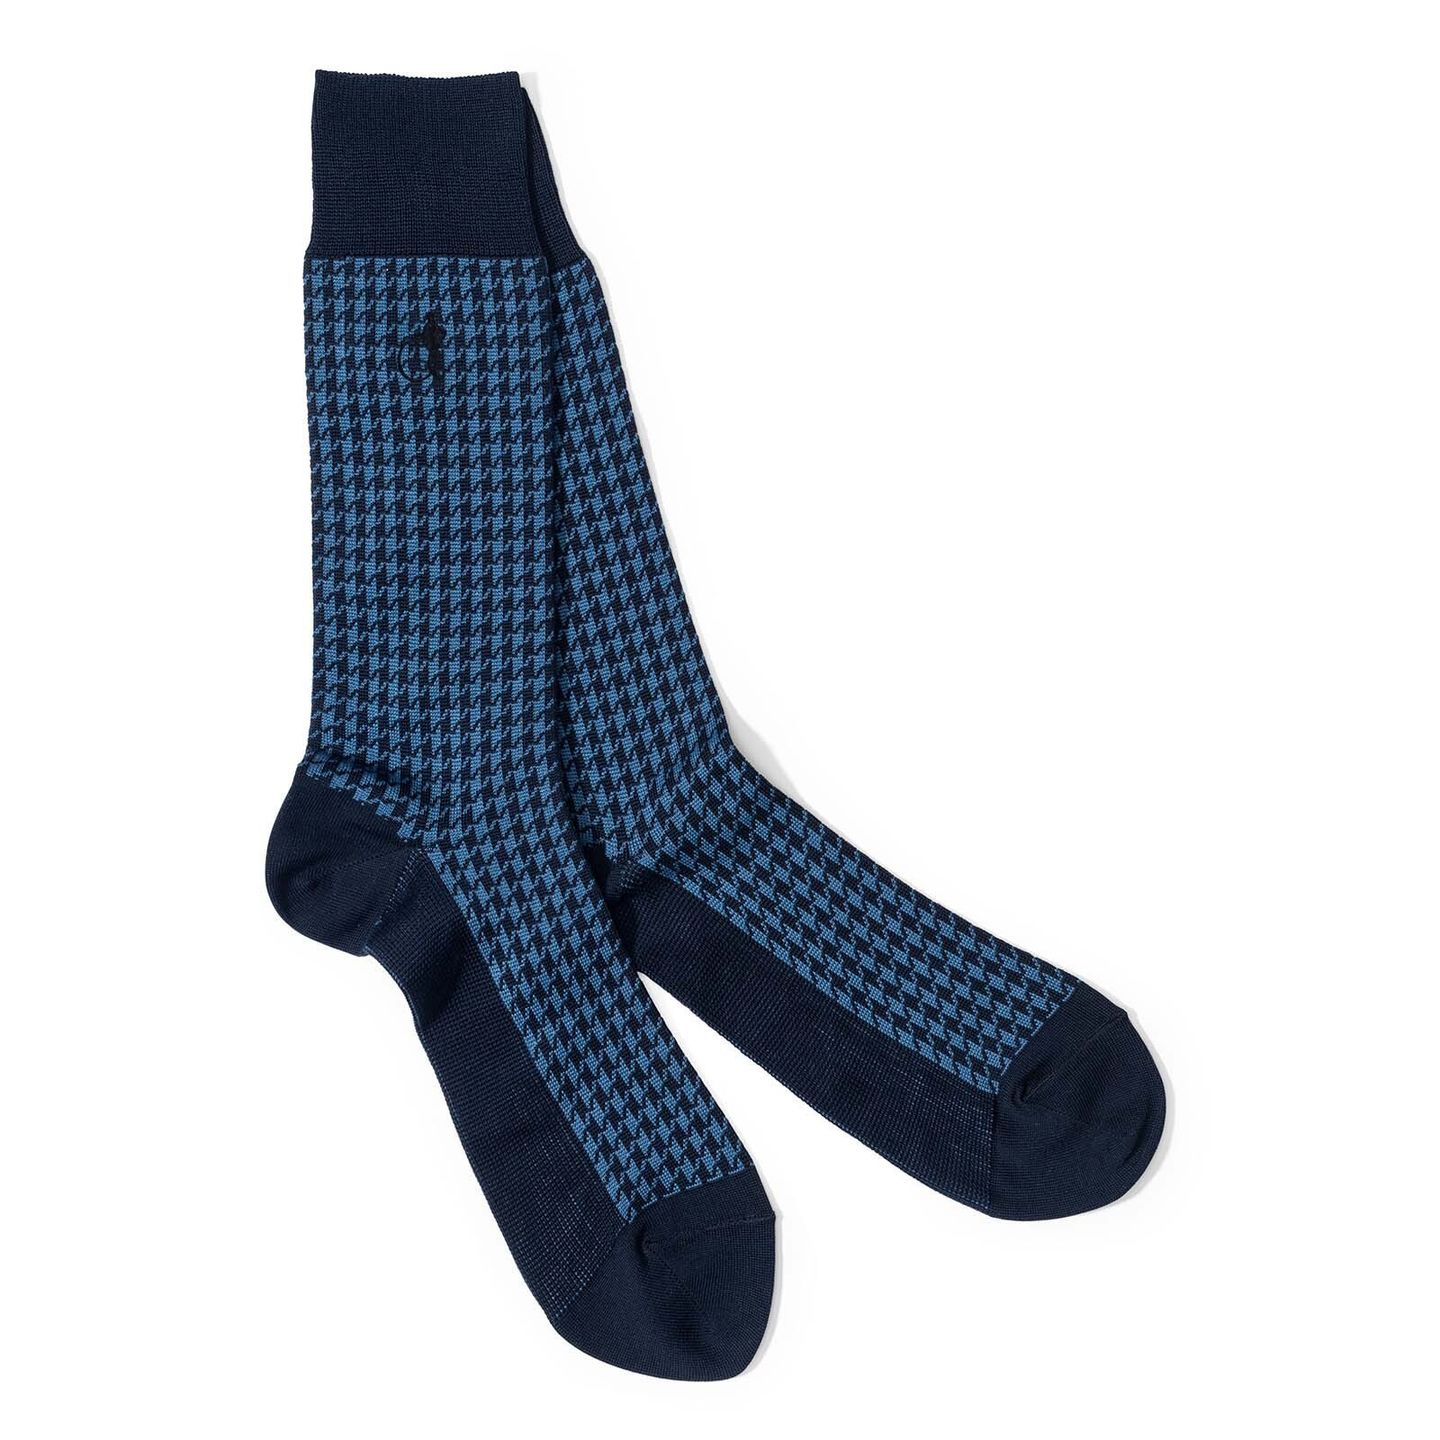 1 pair of mens chequered socks in two shades of blue from the Jermyn St. Gent collection